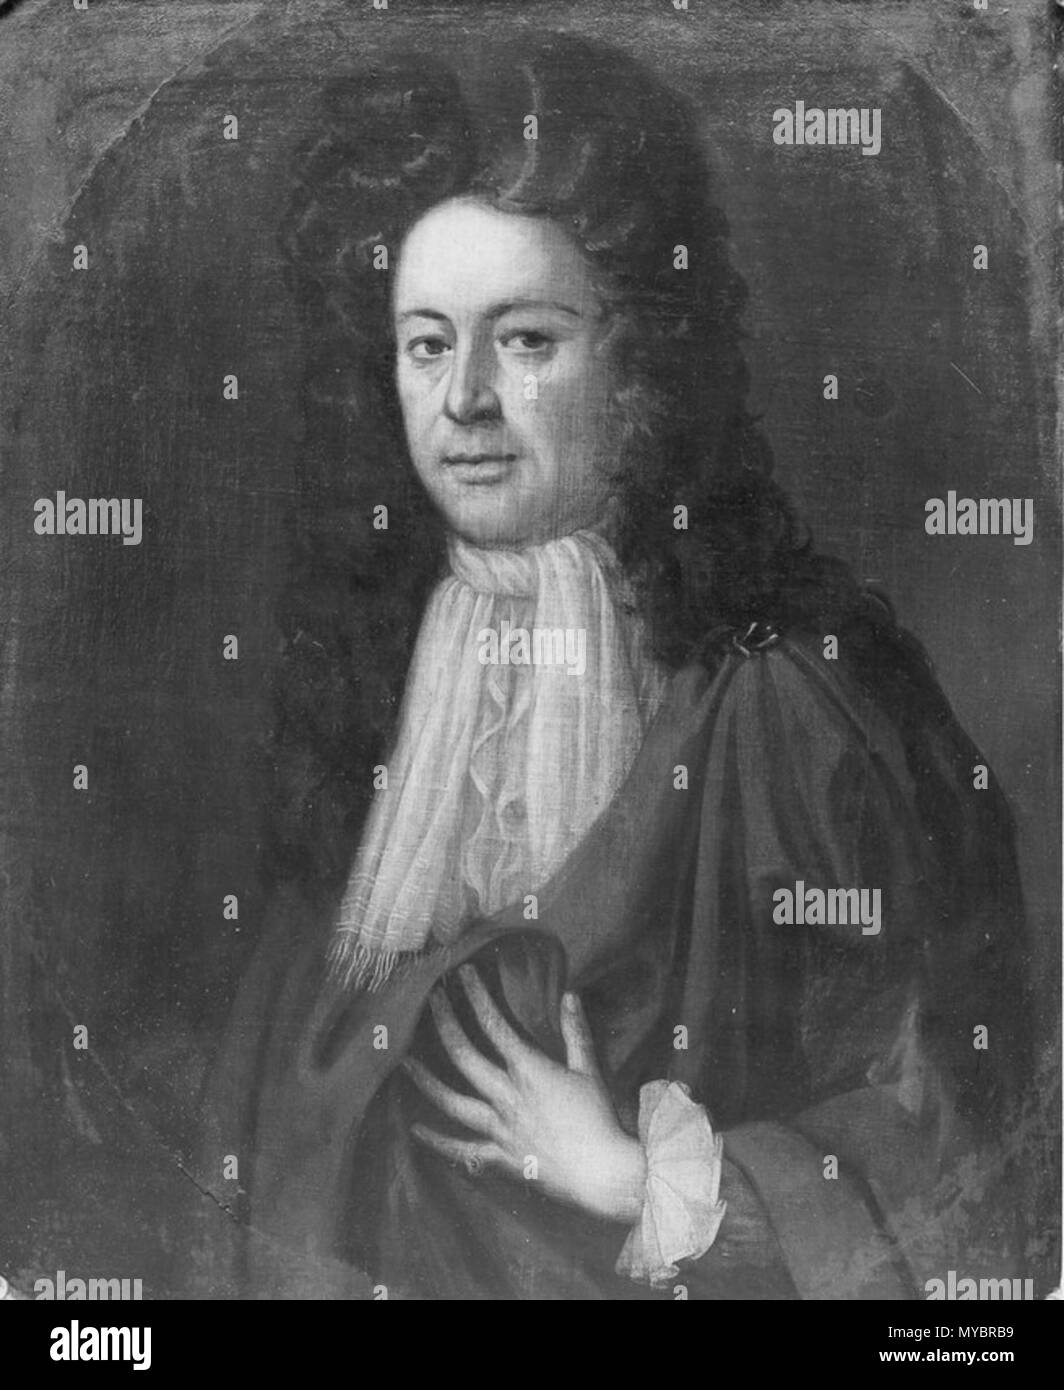 . English: Captain Seth Jermy (1653 - 1724) A framed oil painting, size 63 x 76 cm. Marks on the painting indicate that it was at one time in an oval frame. Seth is shown with fair hair, hazel eyes, a white cravat and a rust coloured cloak. A signet ring is on the little finger of the left hand. The painting was owned by Rev. Frank S Bennett (1866 - 1947), the Dean of Chester, who was a descendant of Mary Jermy, the daughter of Captain Seth Jermy. 1 January 2013, 19:19:40. Colin Jermy 96 Captain Seth Jermy Stock Photo